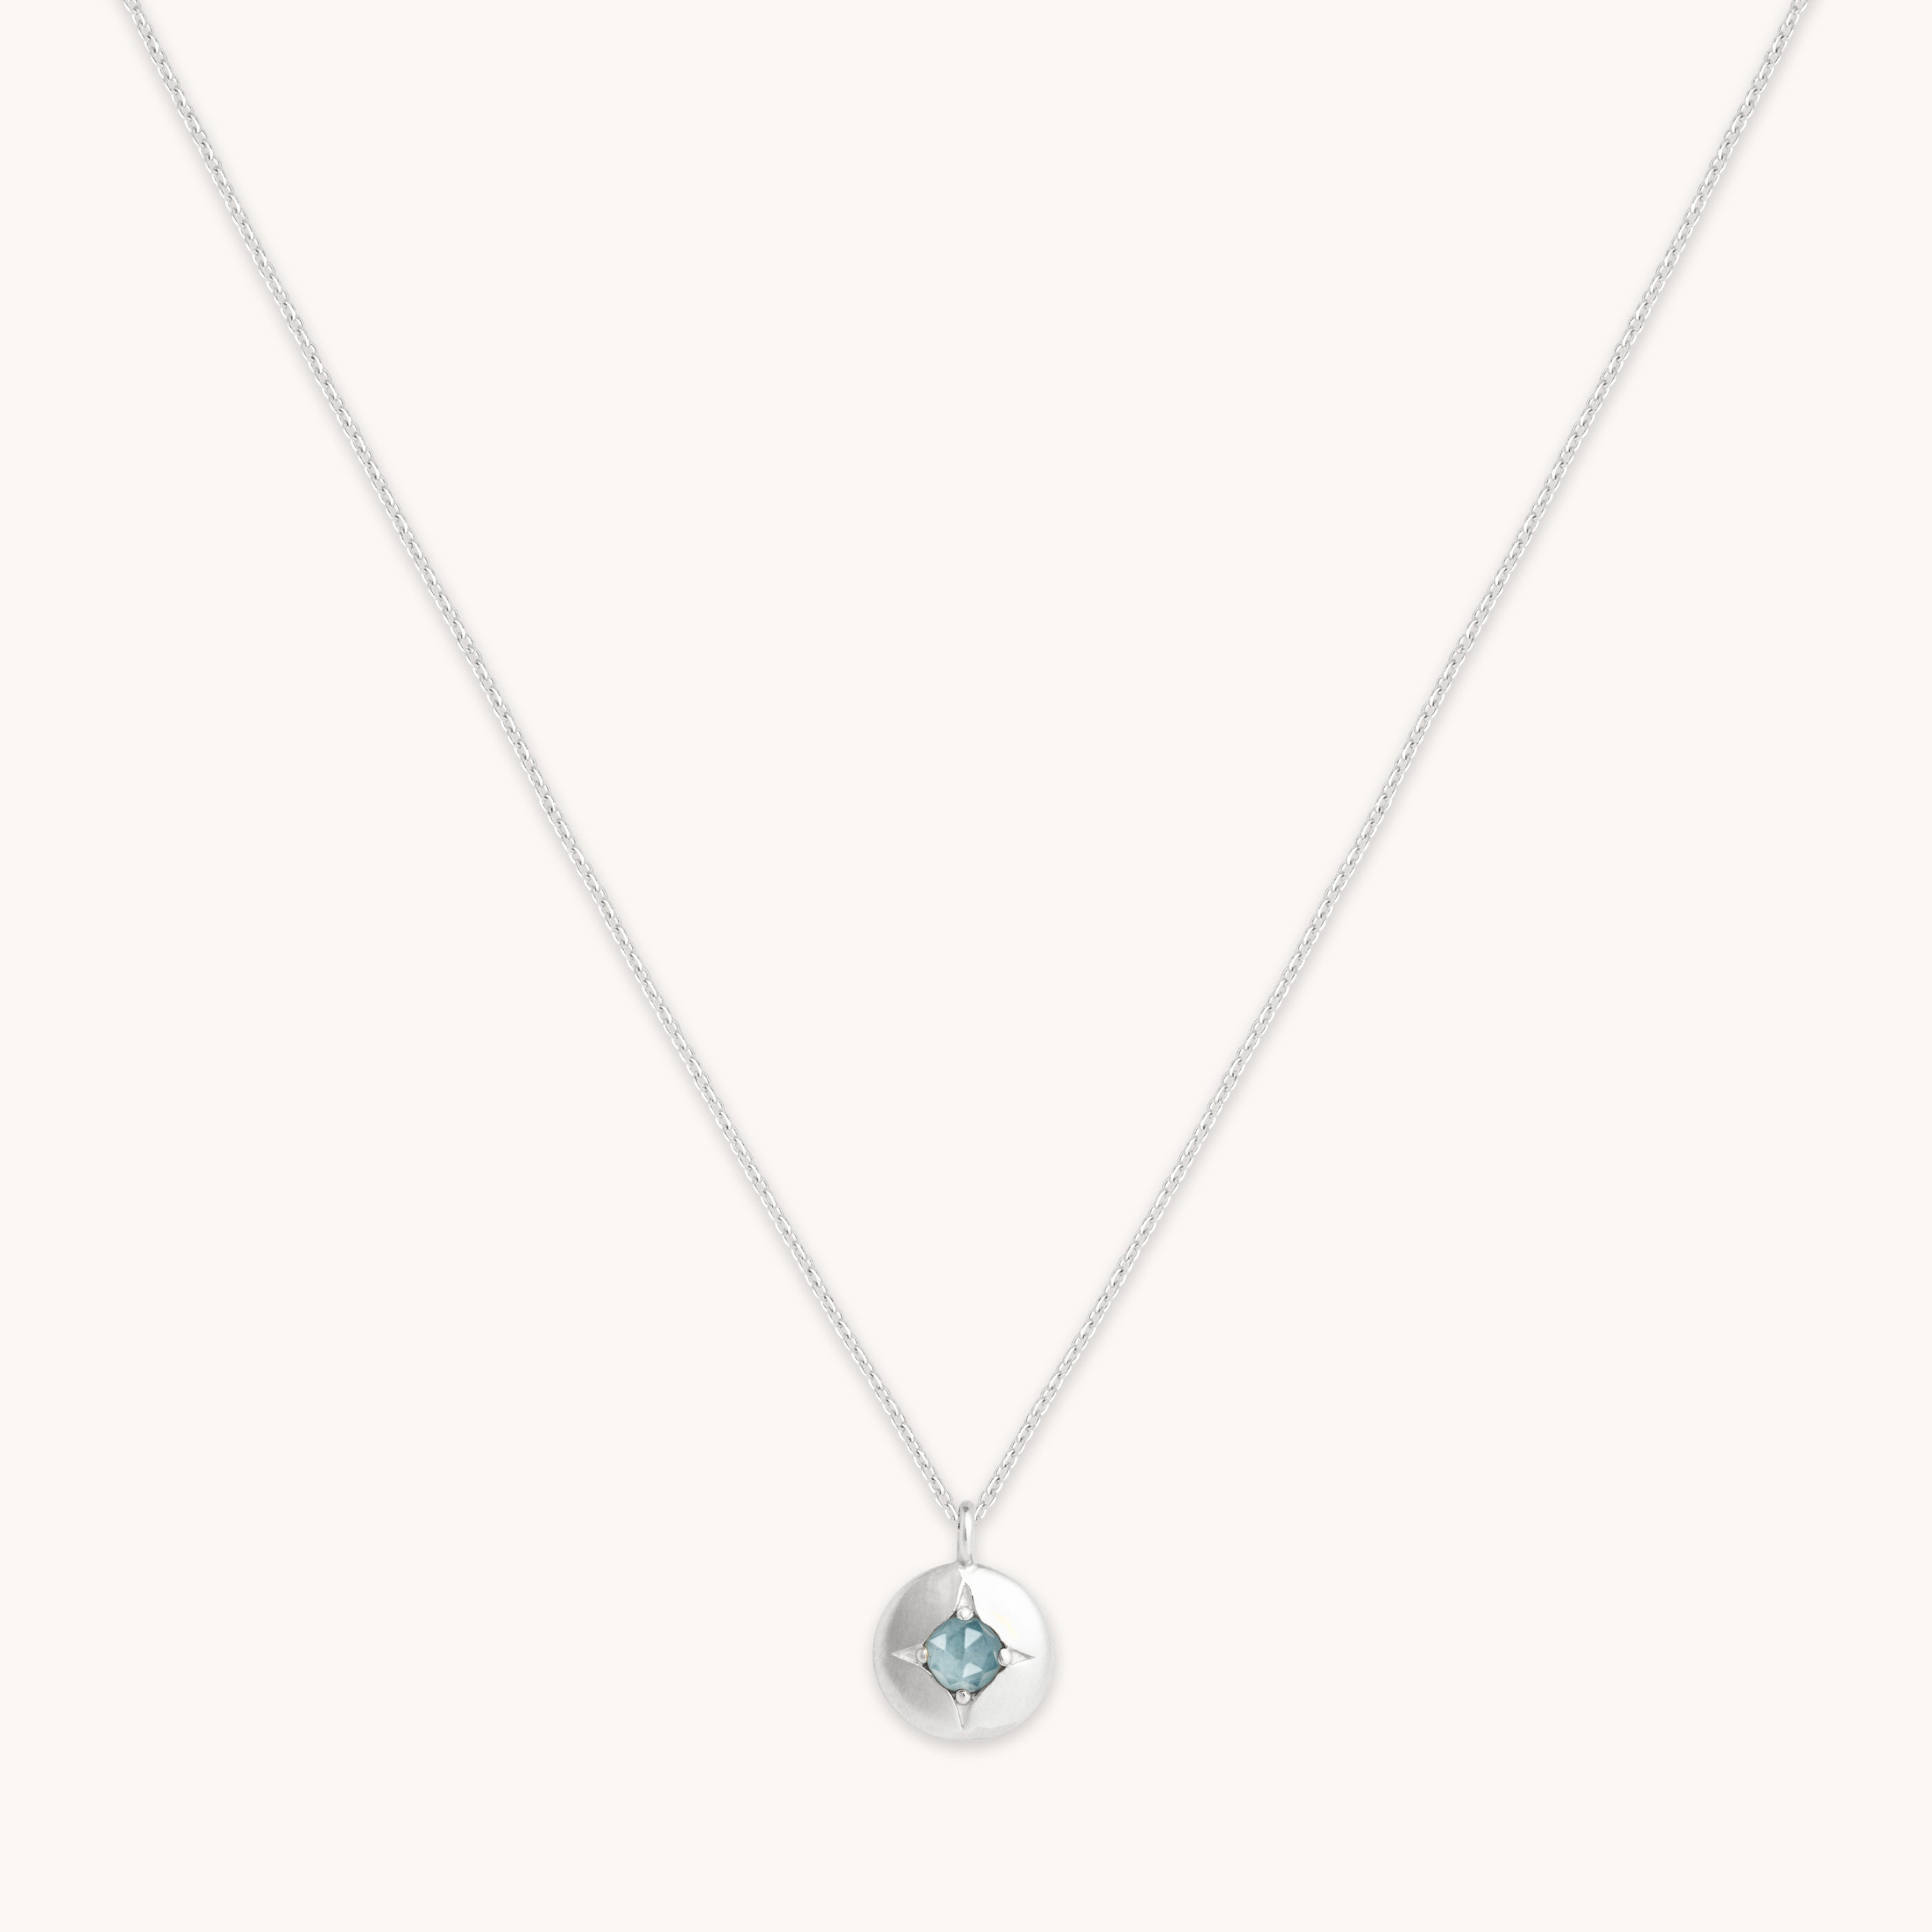 March Birthstone Necklace in Solid White Gold